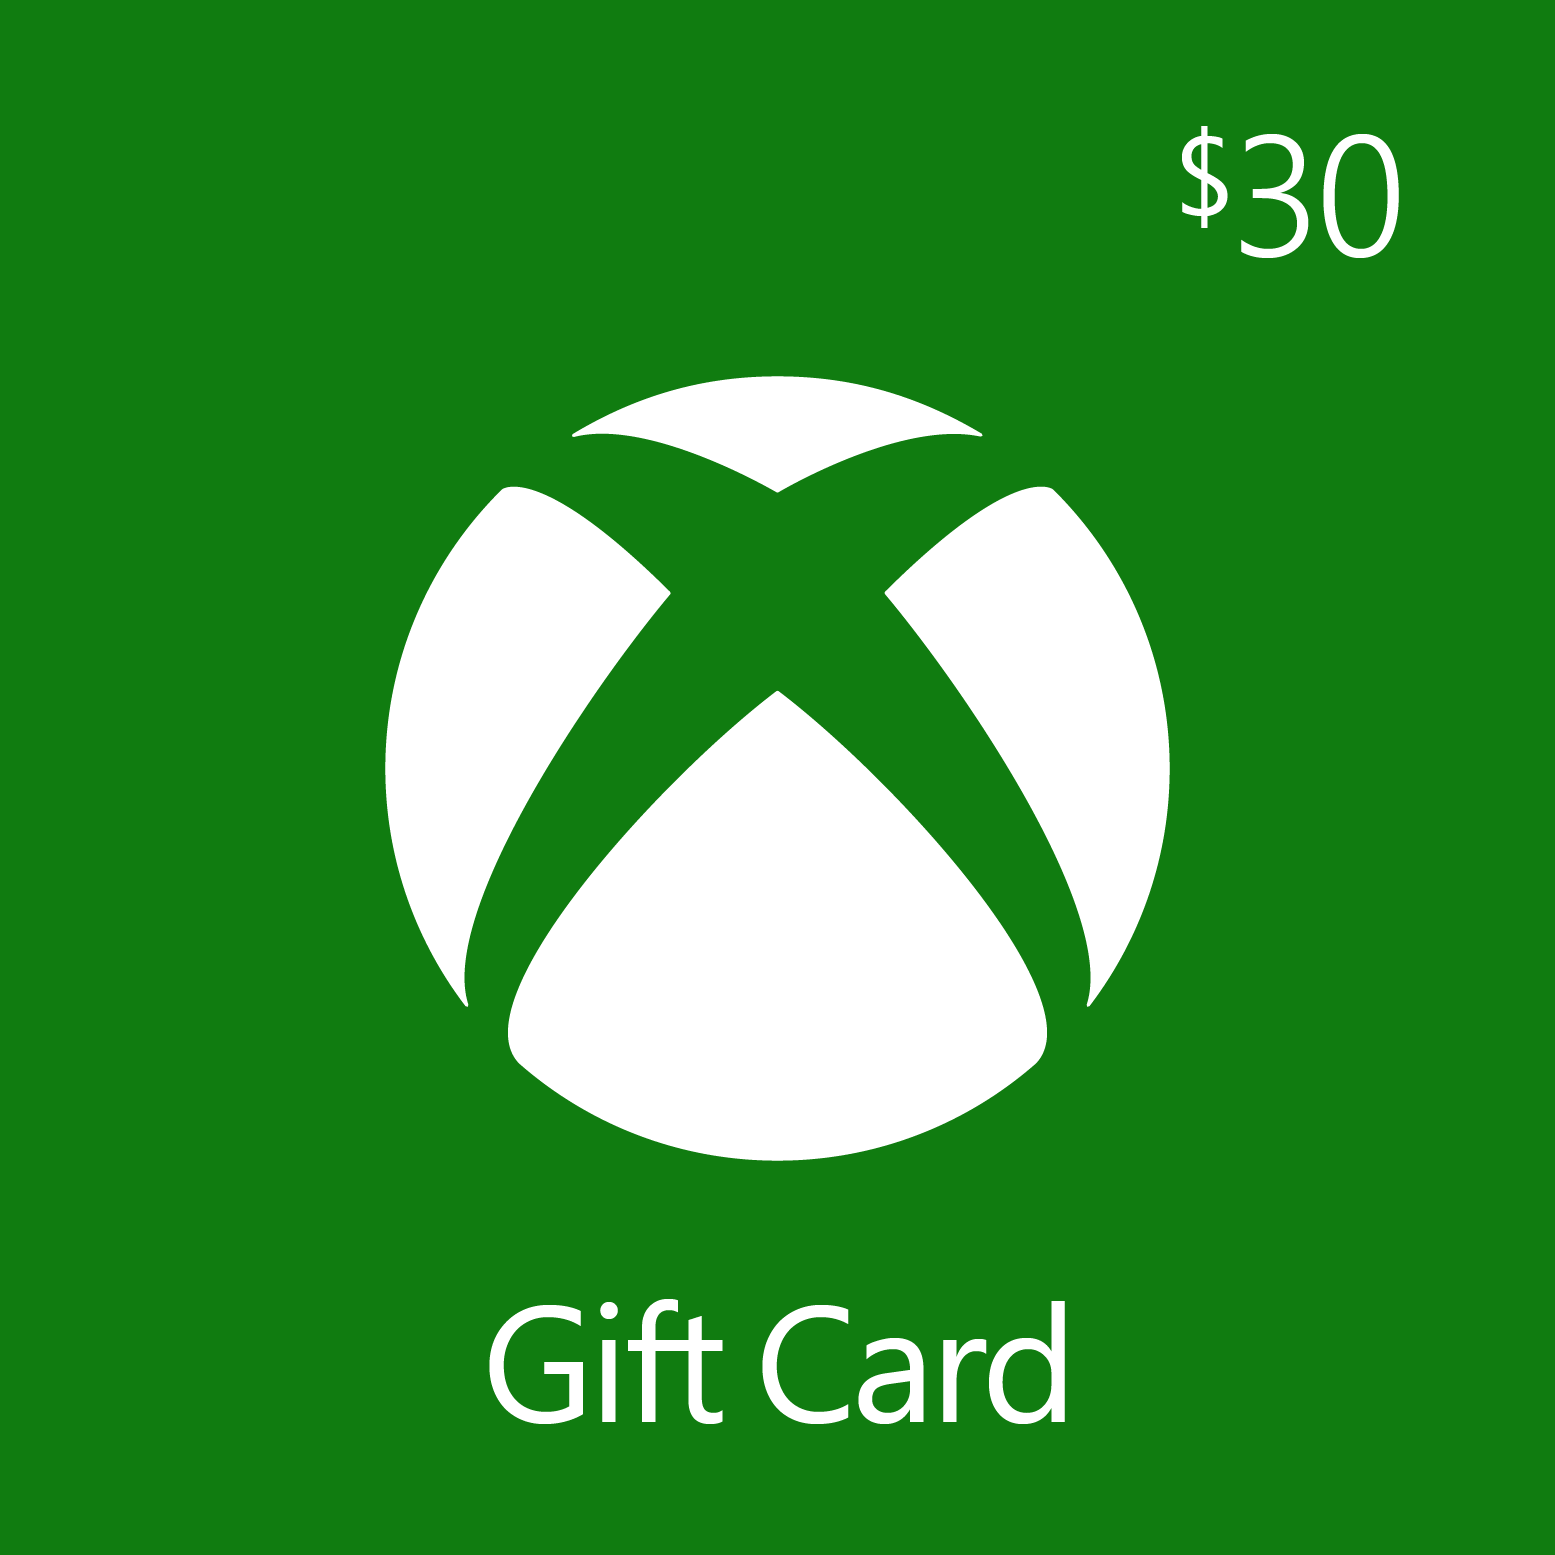  Google Play gift code - give the gift of games, apps and more  (Email or Text Message Delivery - US Only) - Happy Holiday Presents: Gift  Cards